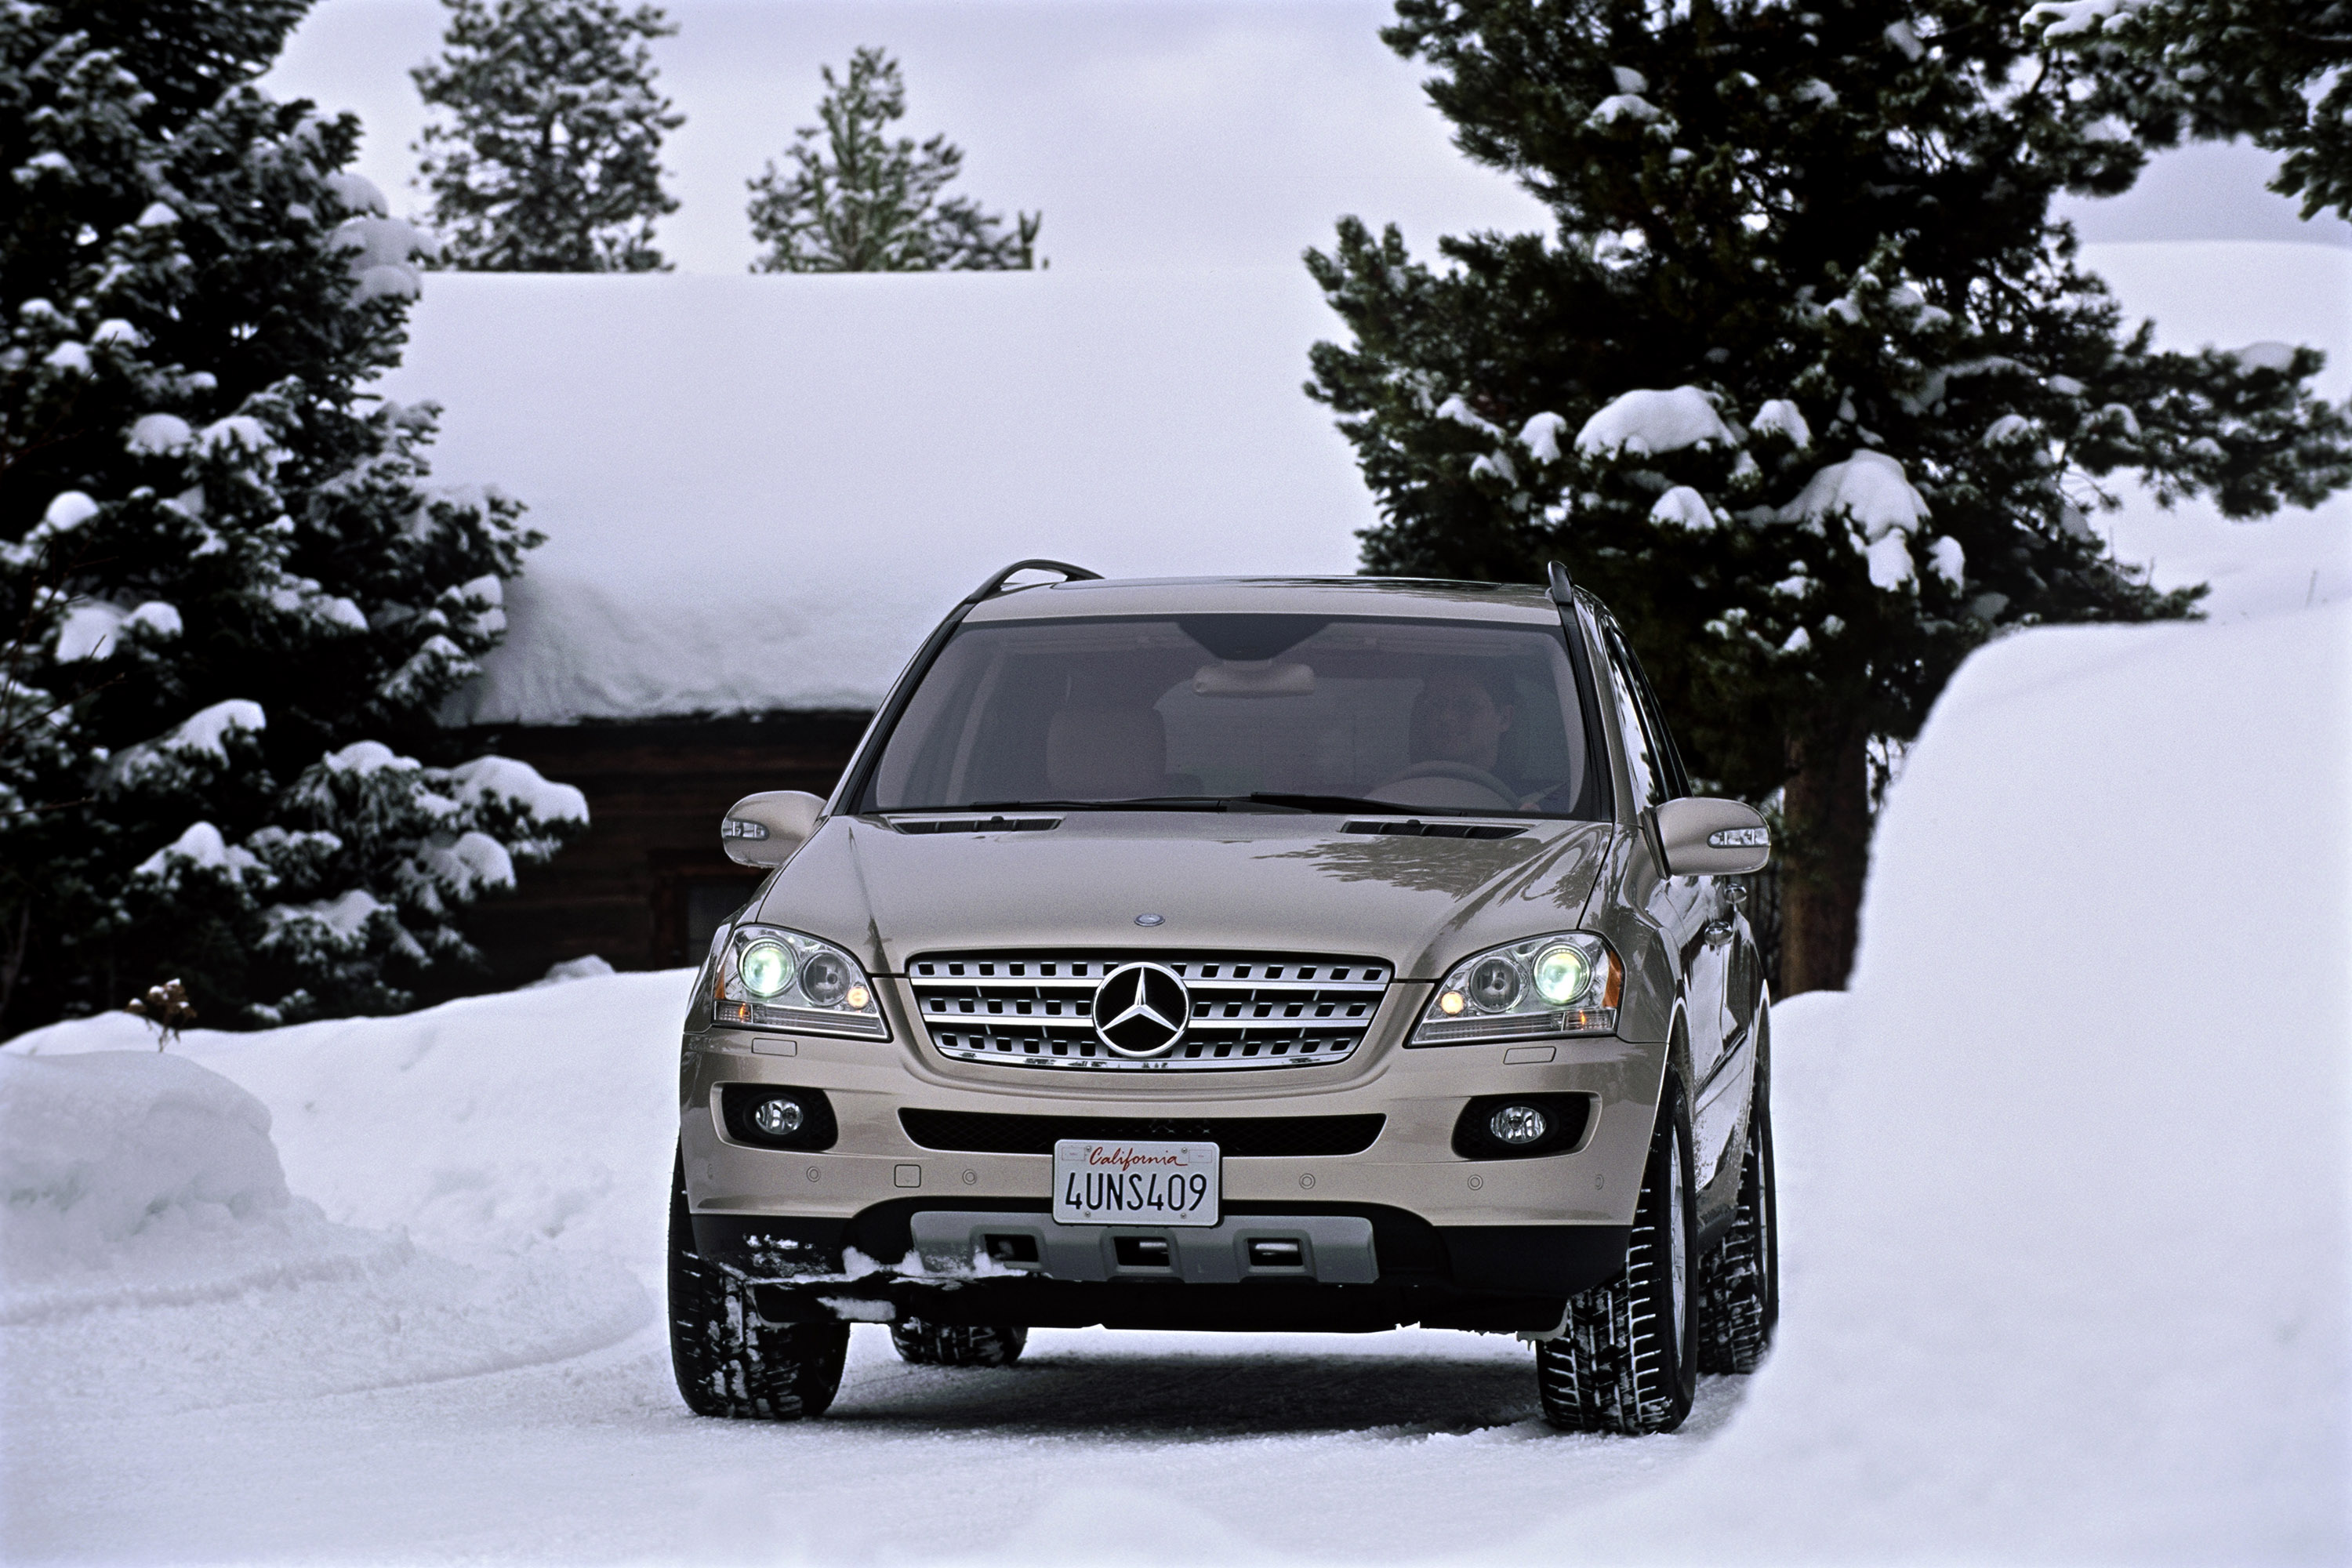 Mercedes Benz Ml500 06 Hd Picture 2 Of 33 944 3000x00